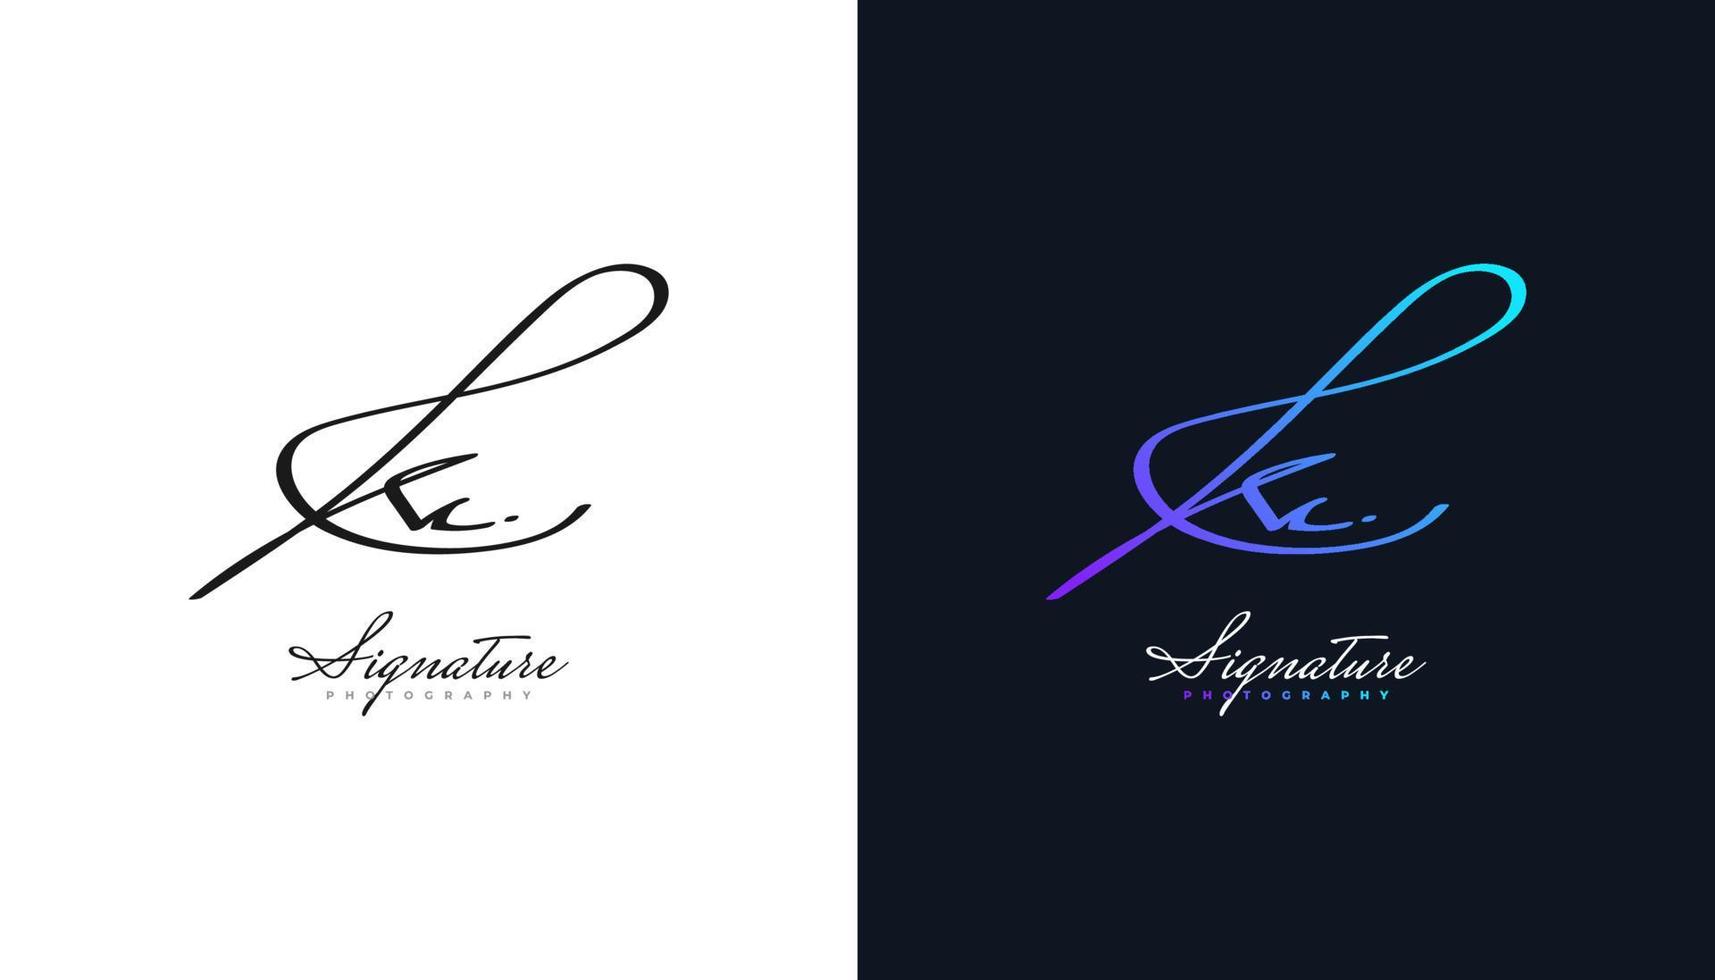 K and C Signature Initial Logo Design with Colorful Handwriting Style. KC Signature Logo or Symbol for Wedding, Fashion, Jewelry, Boutique, Botanical, Floral and Business Identity vector